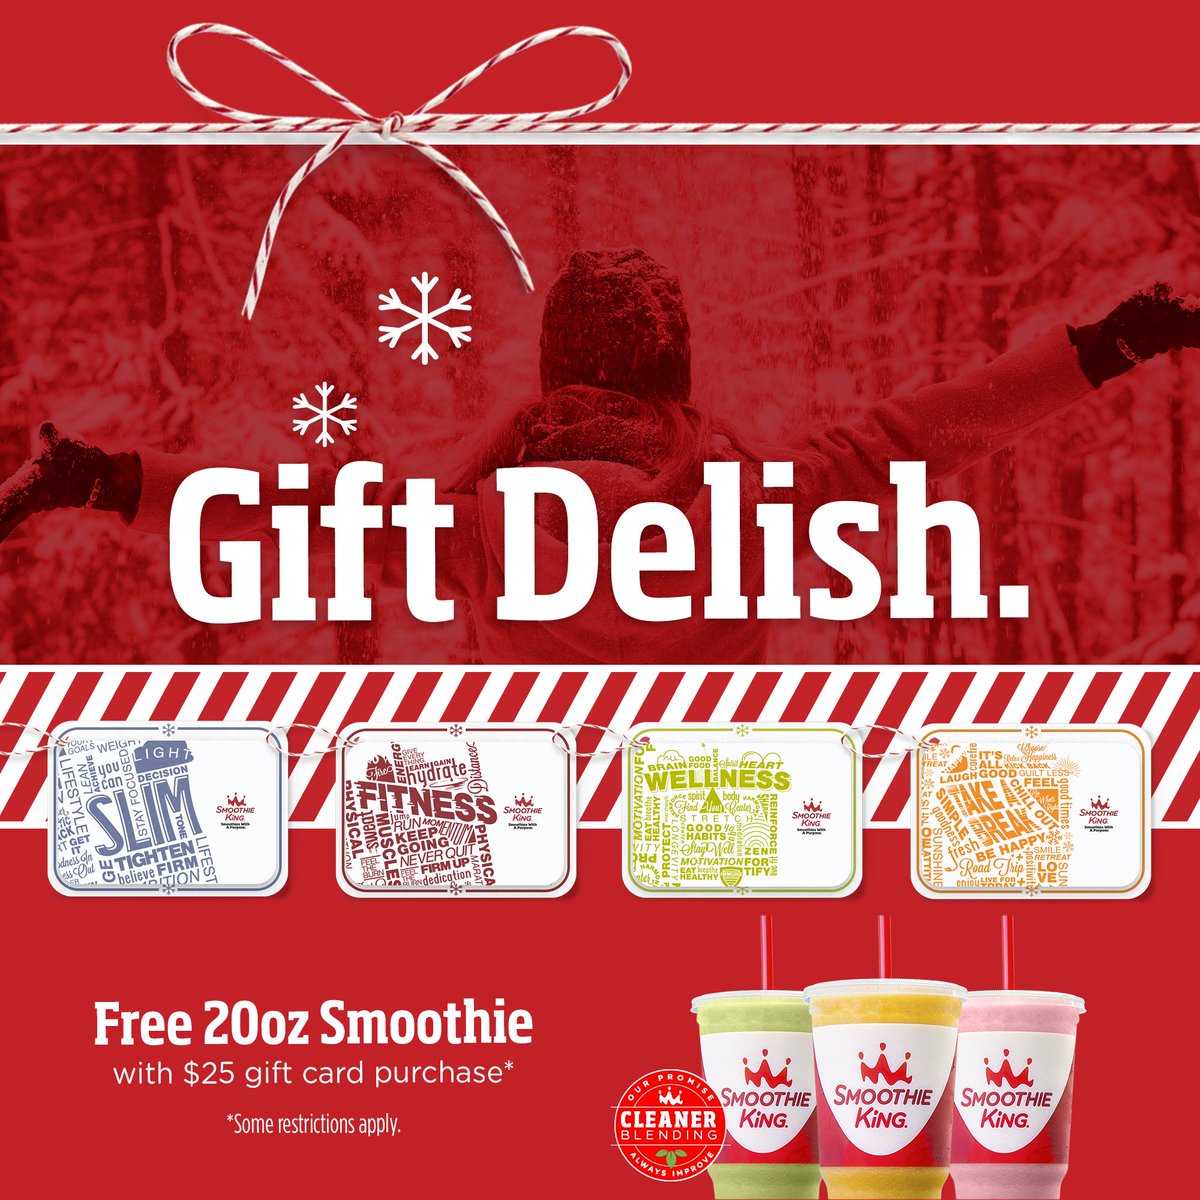 Get A Free 20oz Smoothie With The Purchase Of 25 Gift Card Find Your Local Http Www Locations Smoothieking Com Pic Twitter Txy3kao4